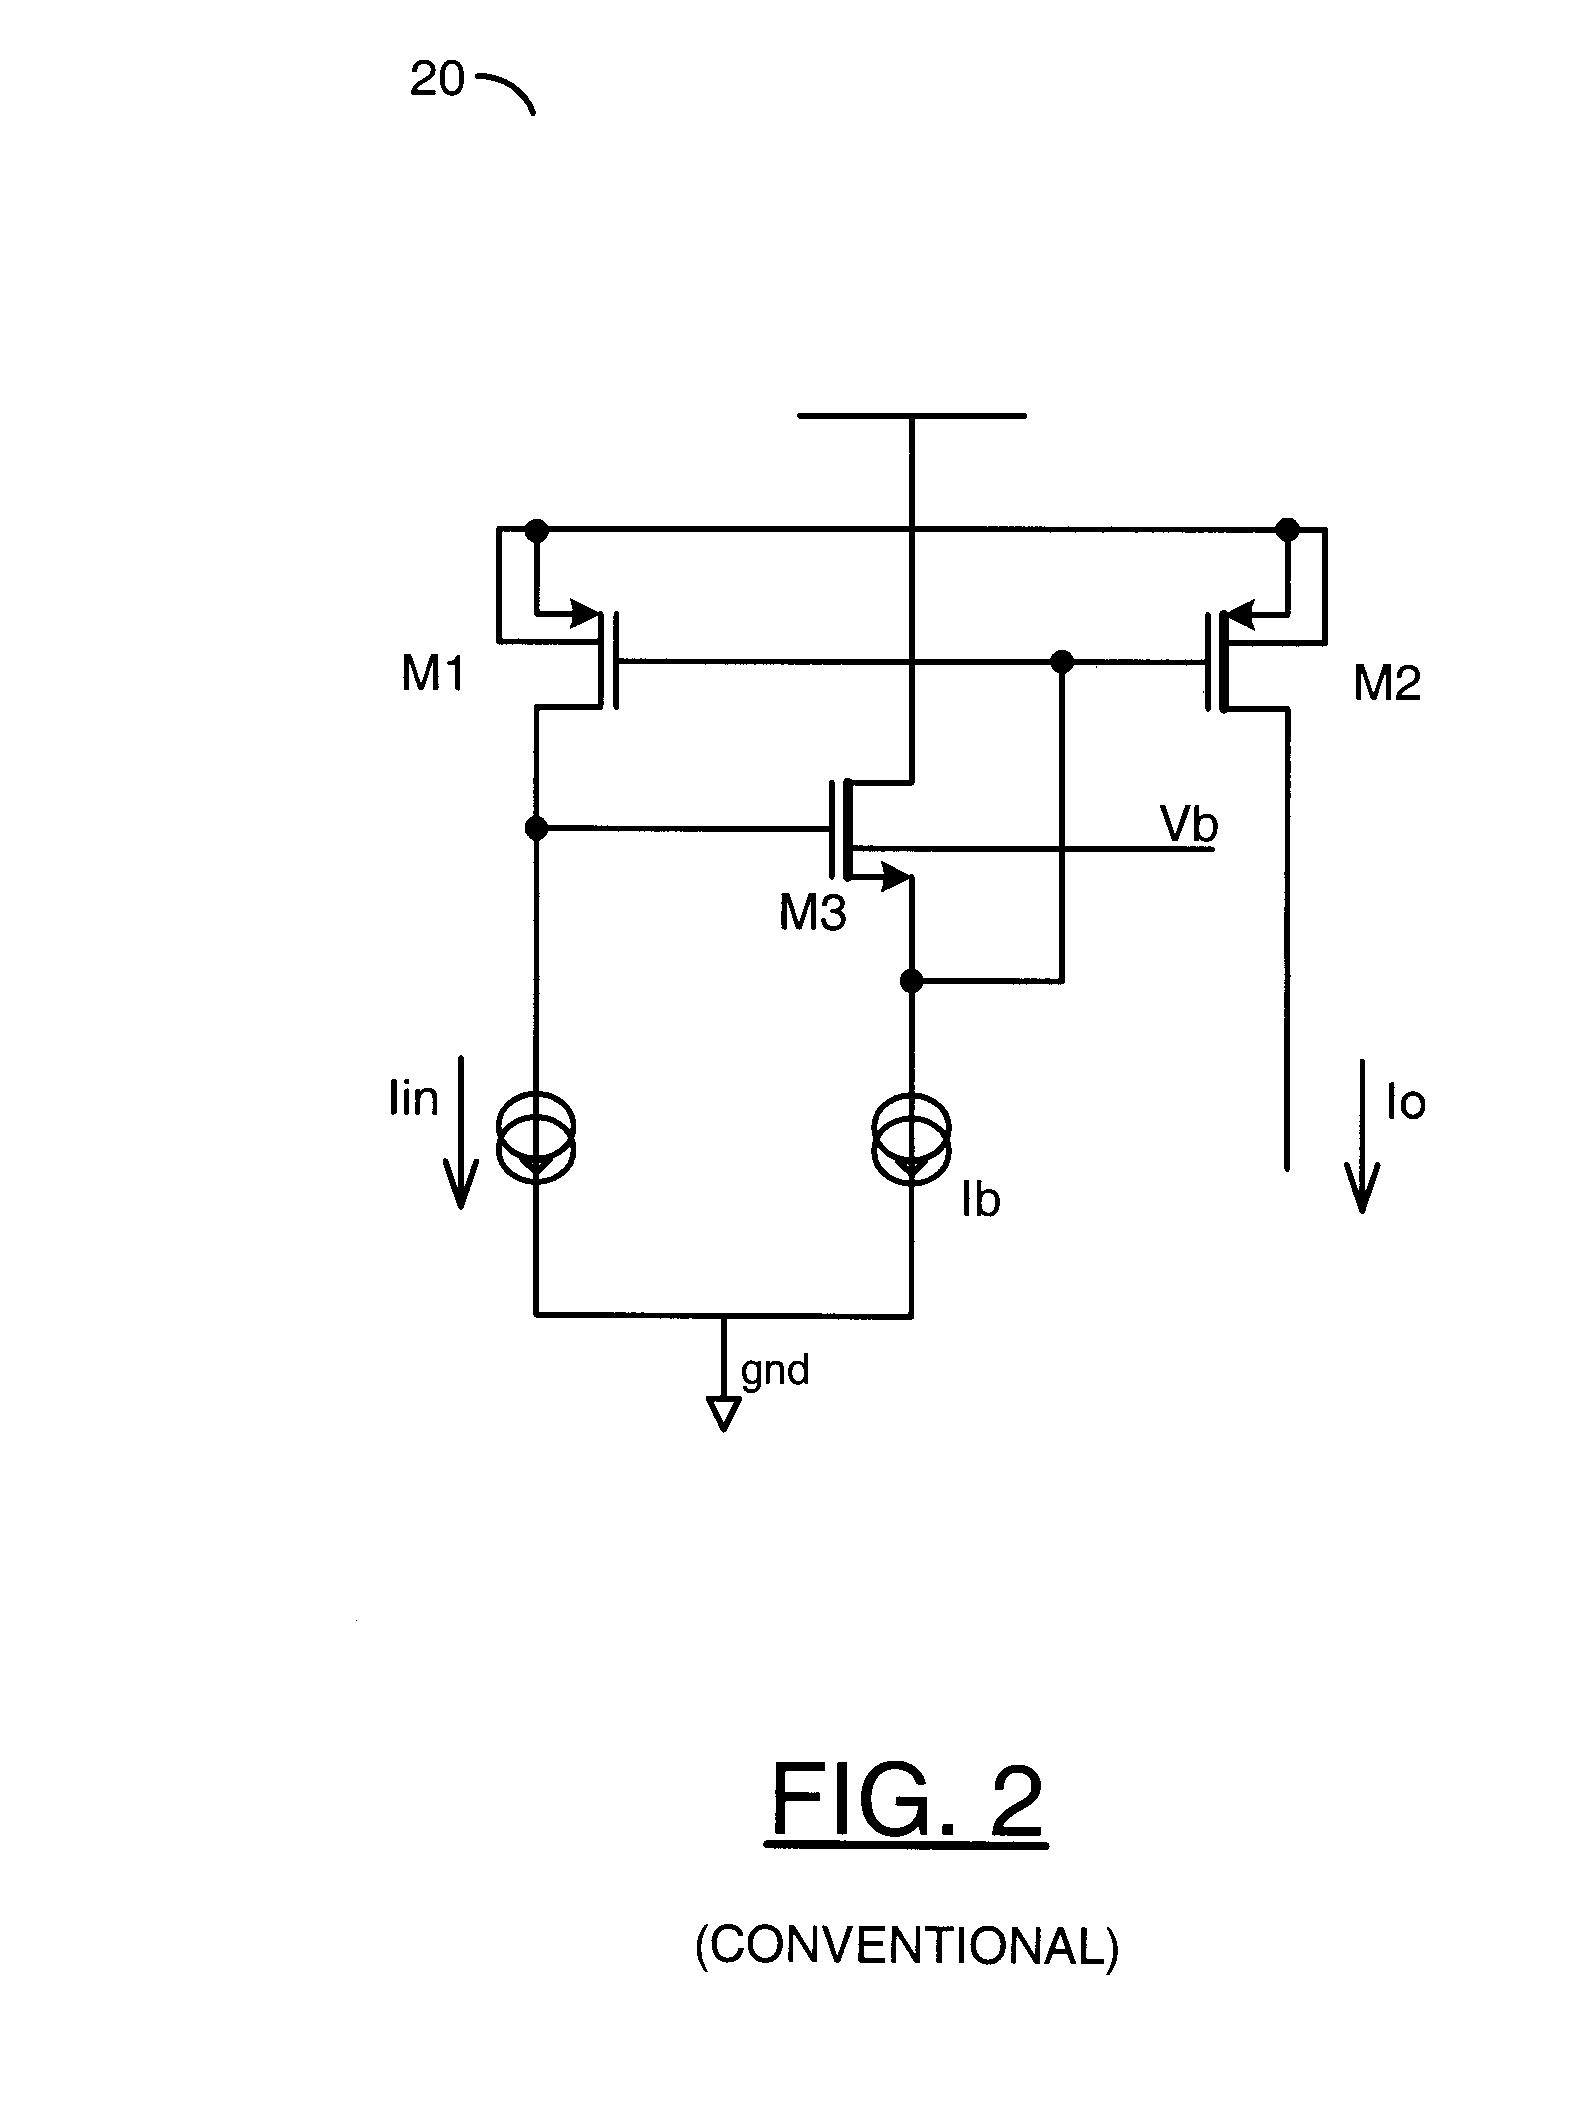 Robust current mirror with improved input voltage headroom